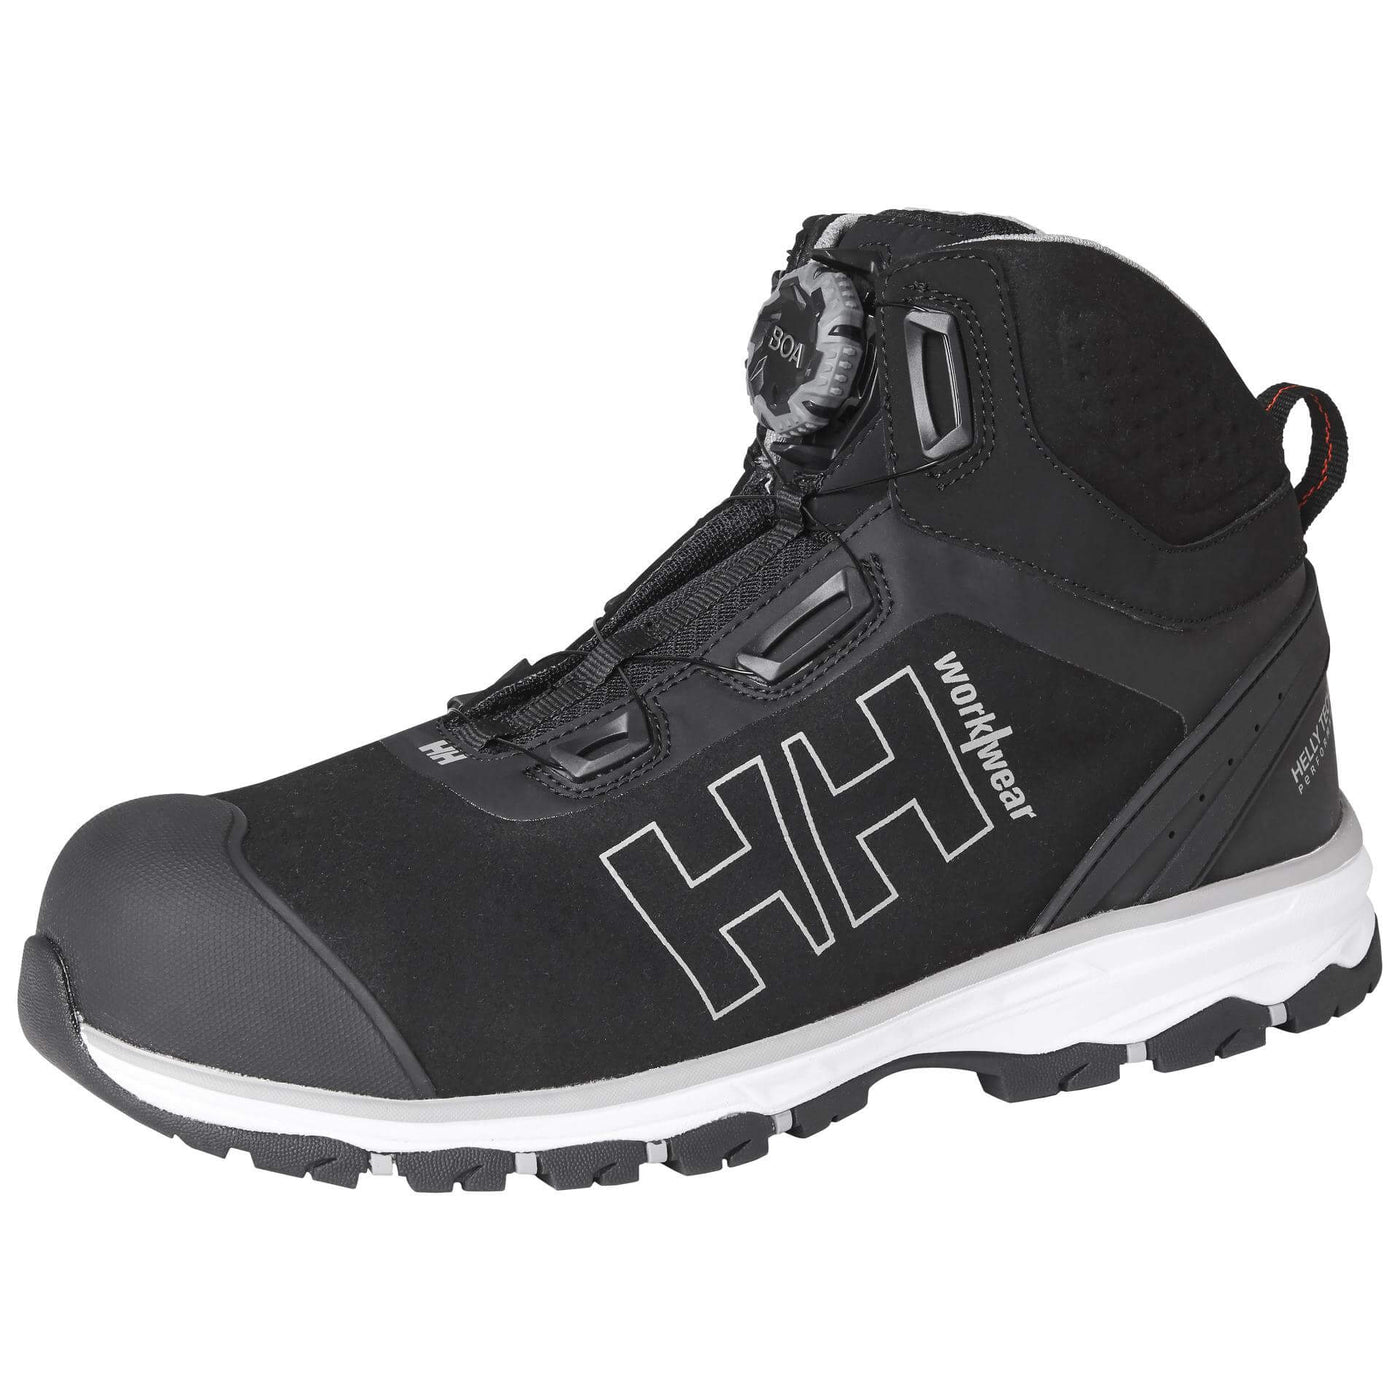 Helly Hansen Chelsea Evolution Boa Wide Composite Toe Cap Safety Work Boots Black/Grey 3 Angle #colour_black-grey